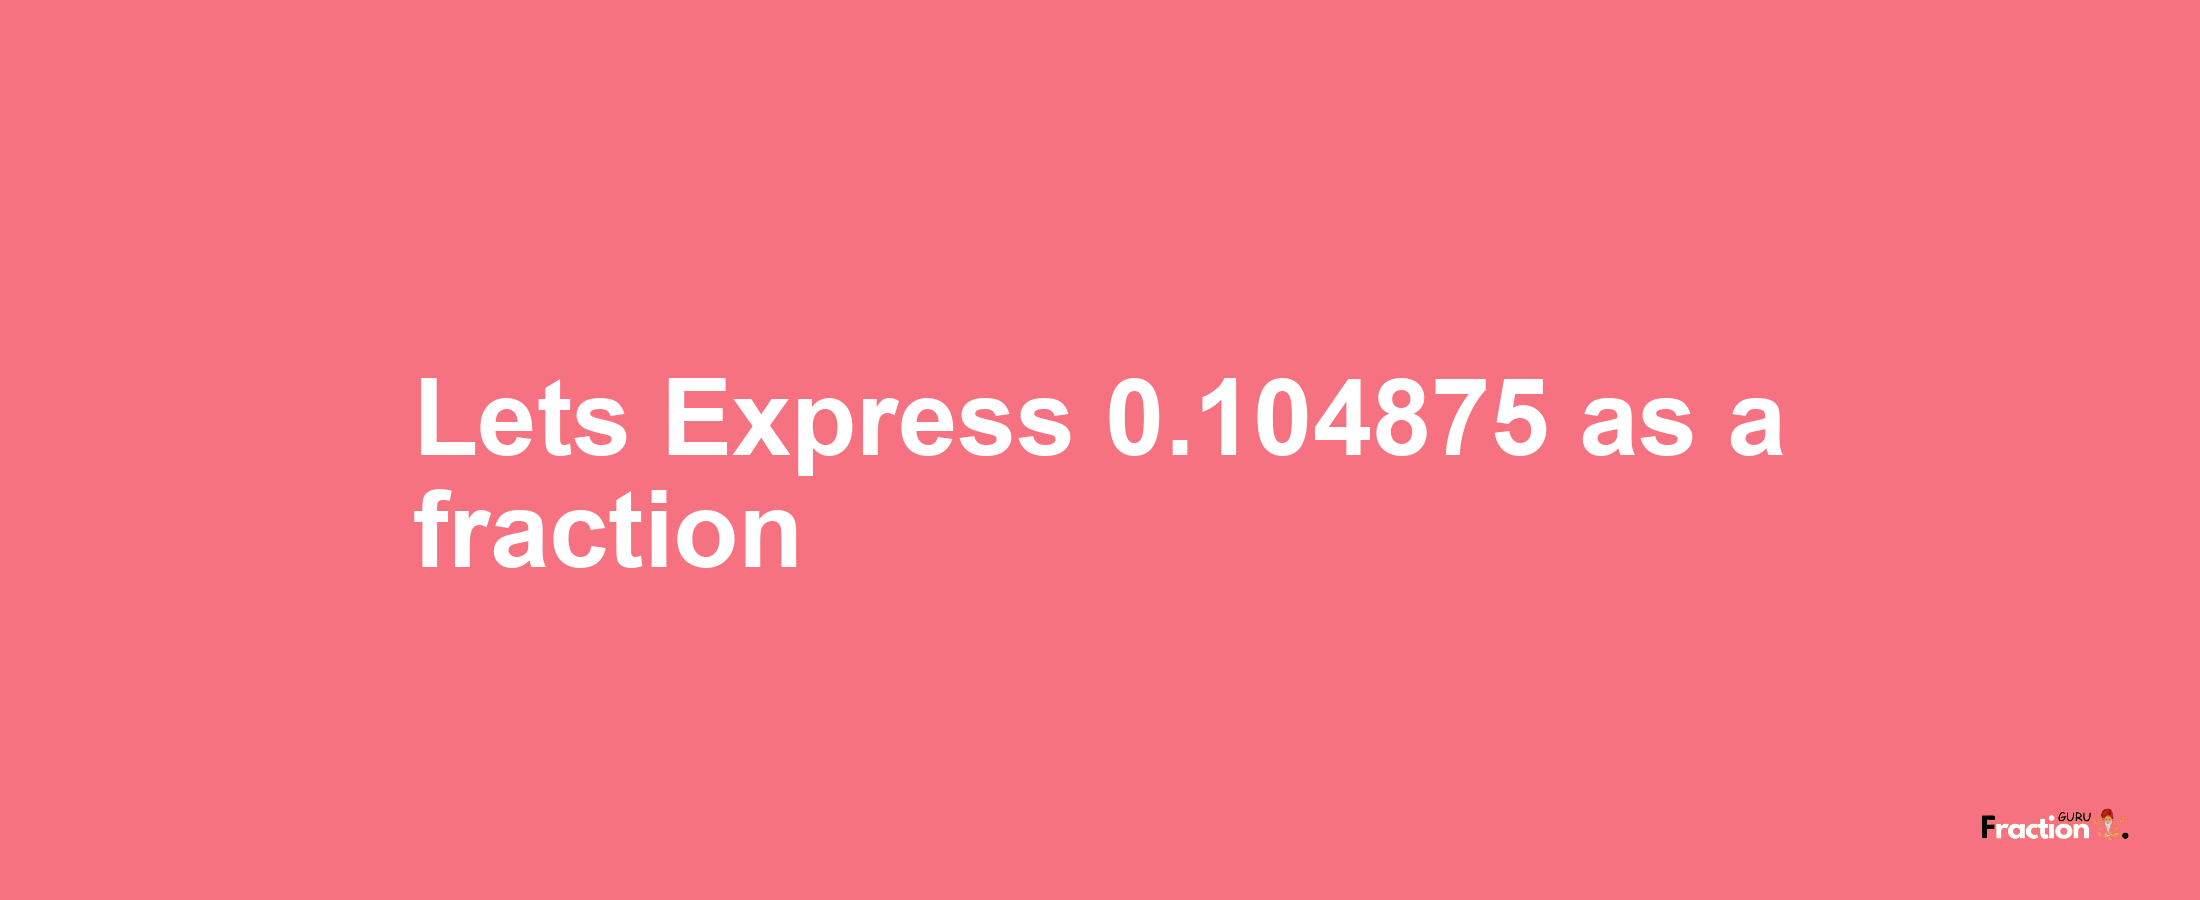 Lets Express 0.104875 as afraction